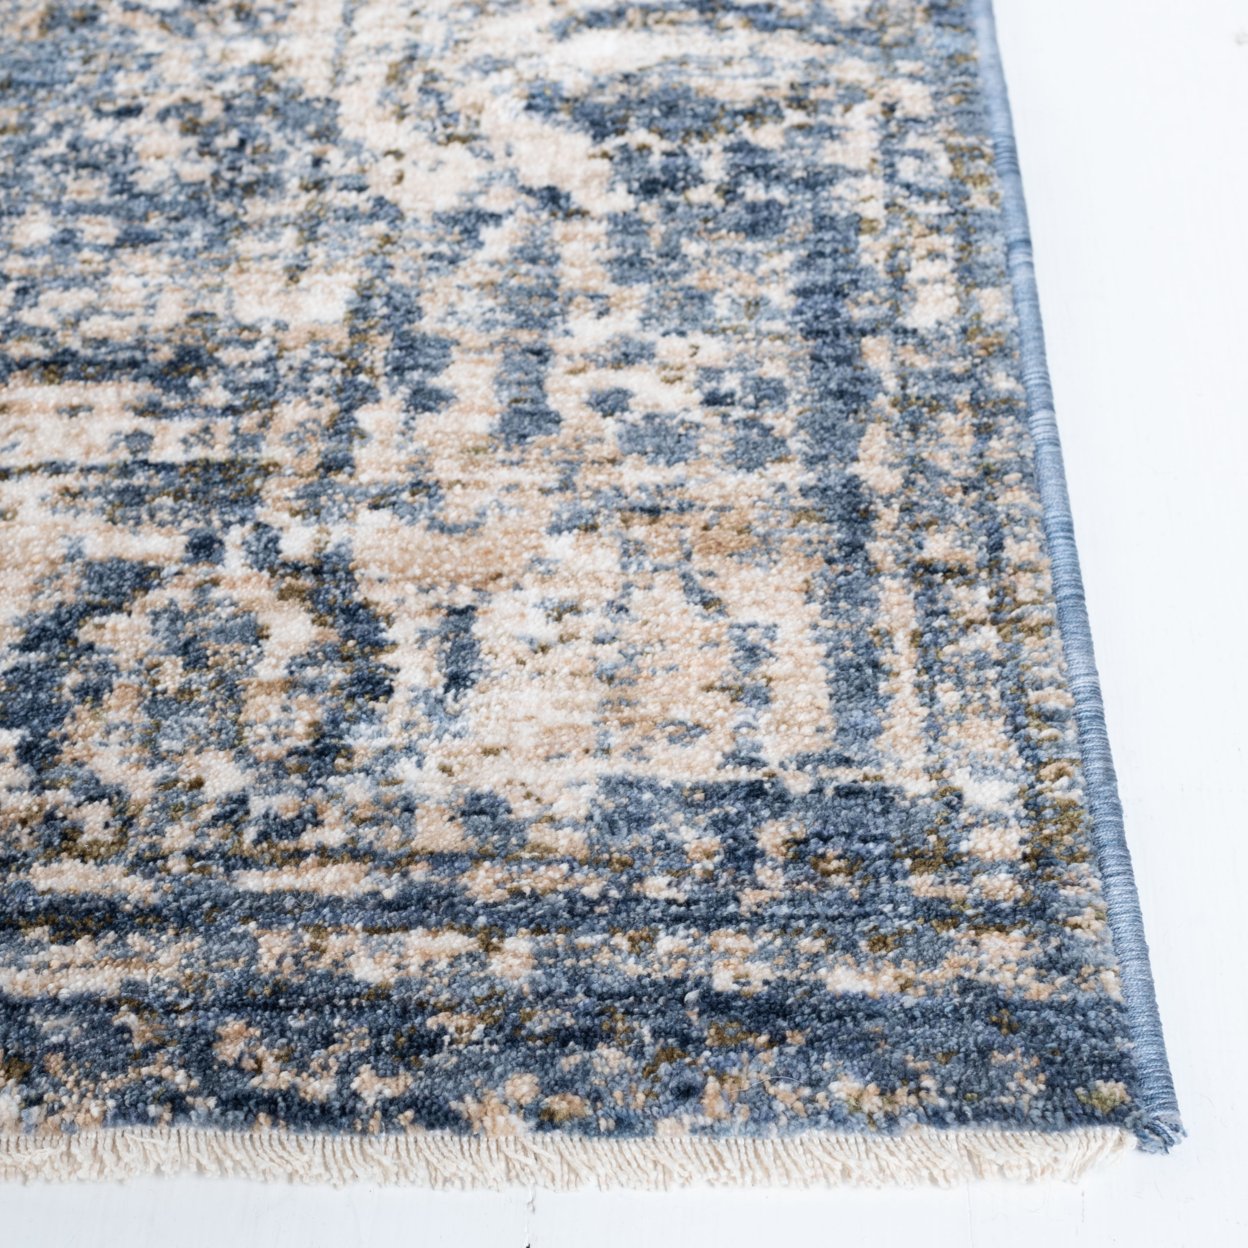 SAFAVIEH Vintage Oushak Collection VOS233M Navy/Ivory Rug - image 2 of 5